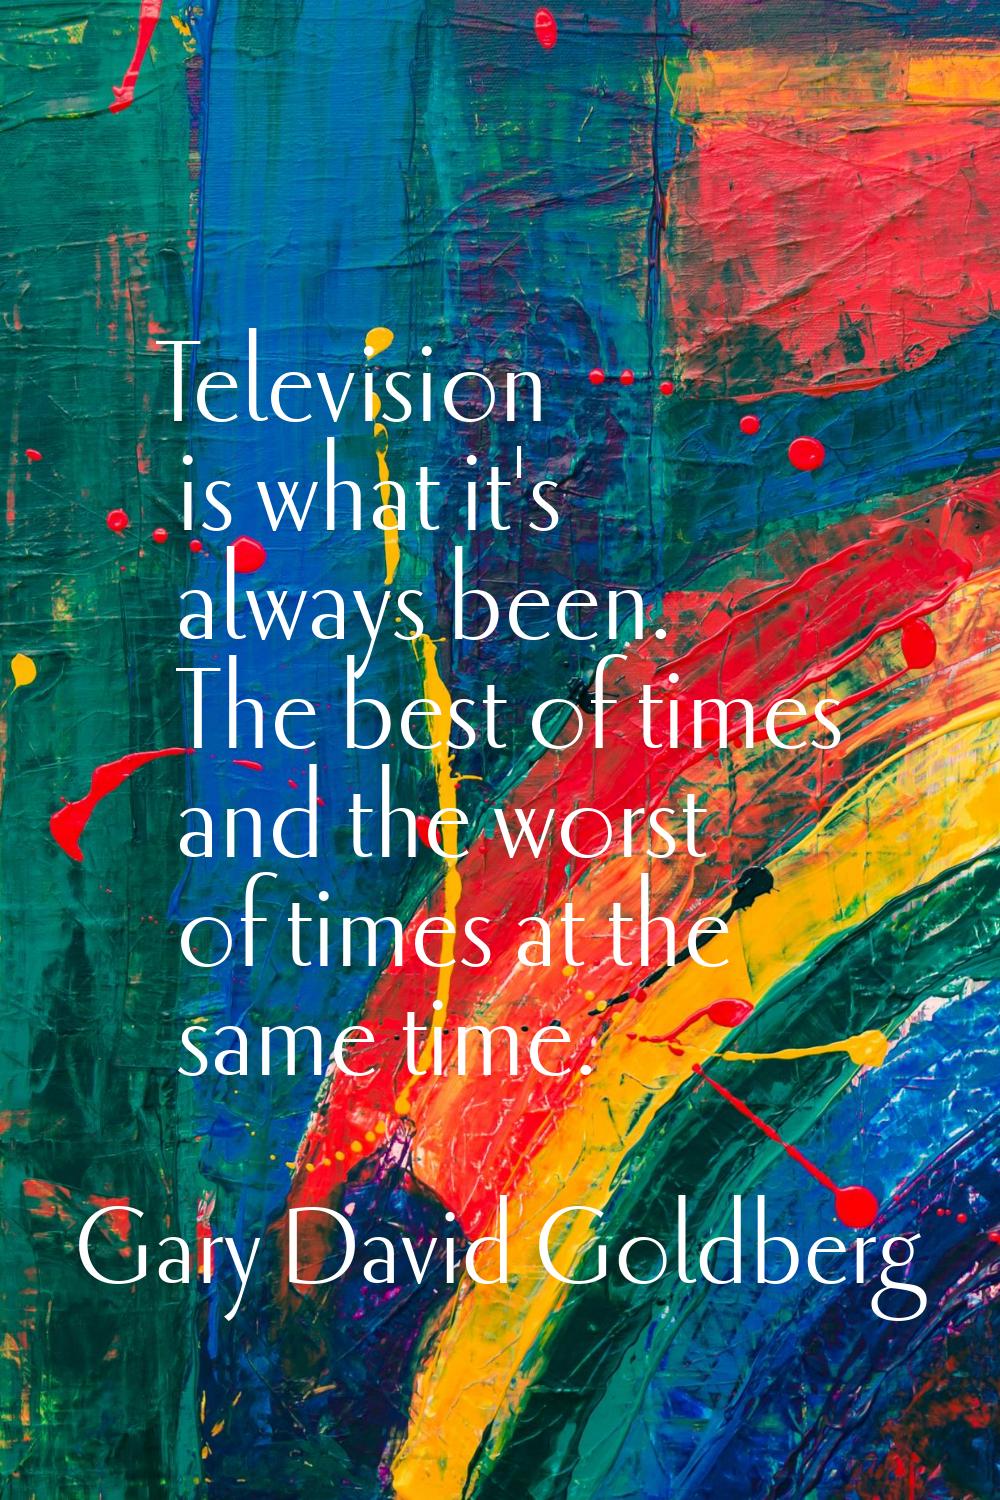 Television is what it's always been. The best of times and the worst of times at the same time.